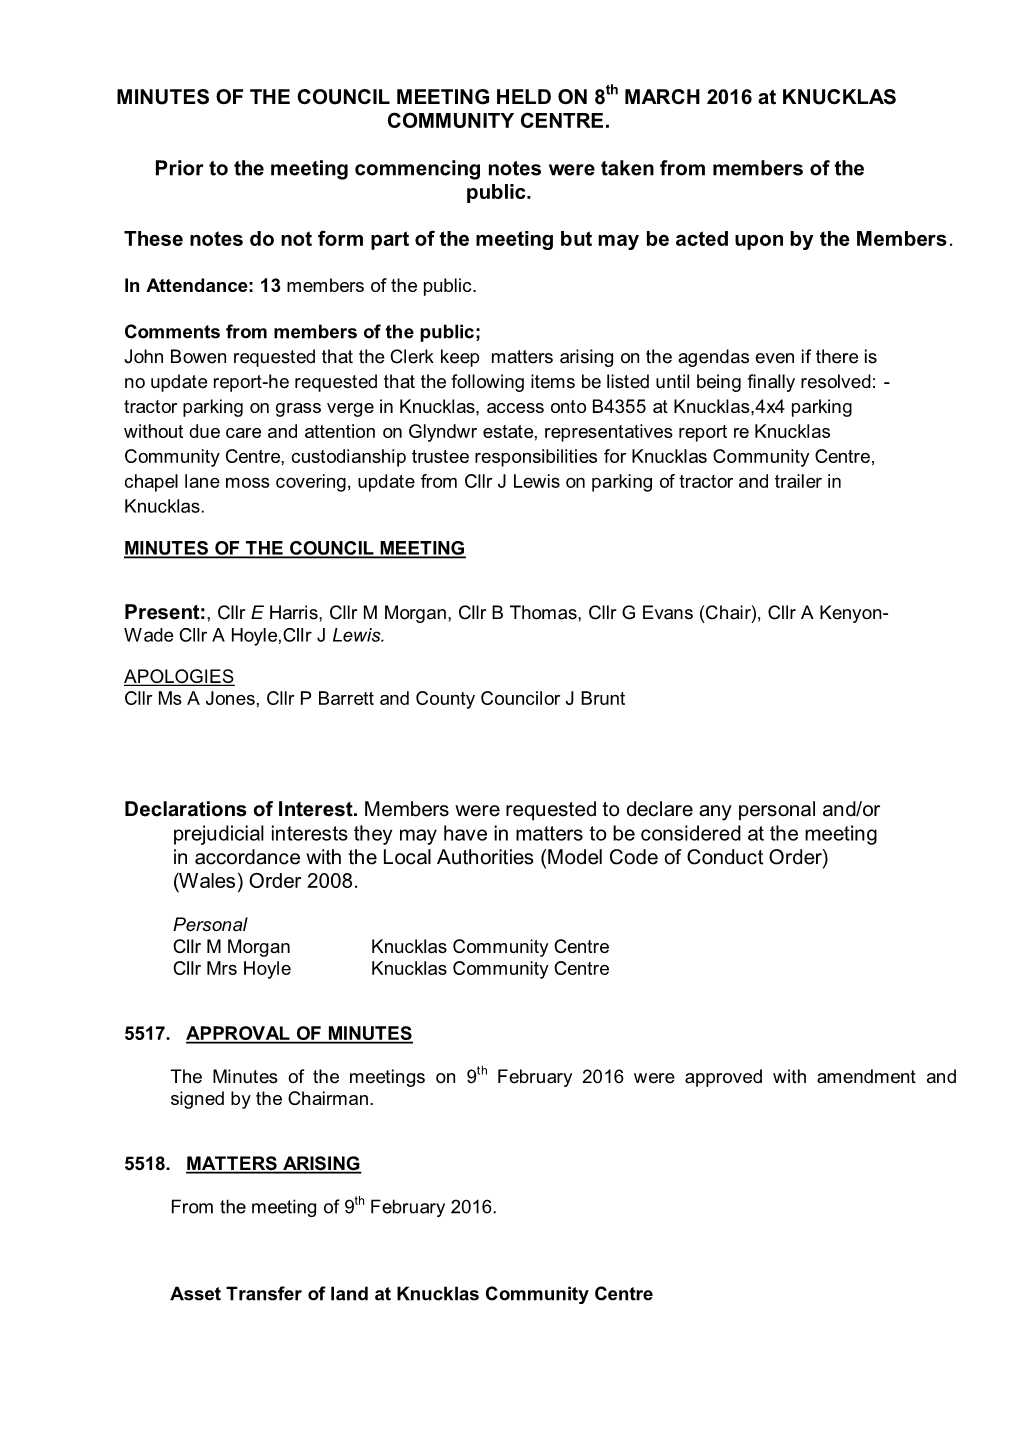 Minutes of the Council Meeting Held on 8 March